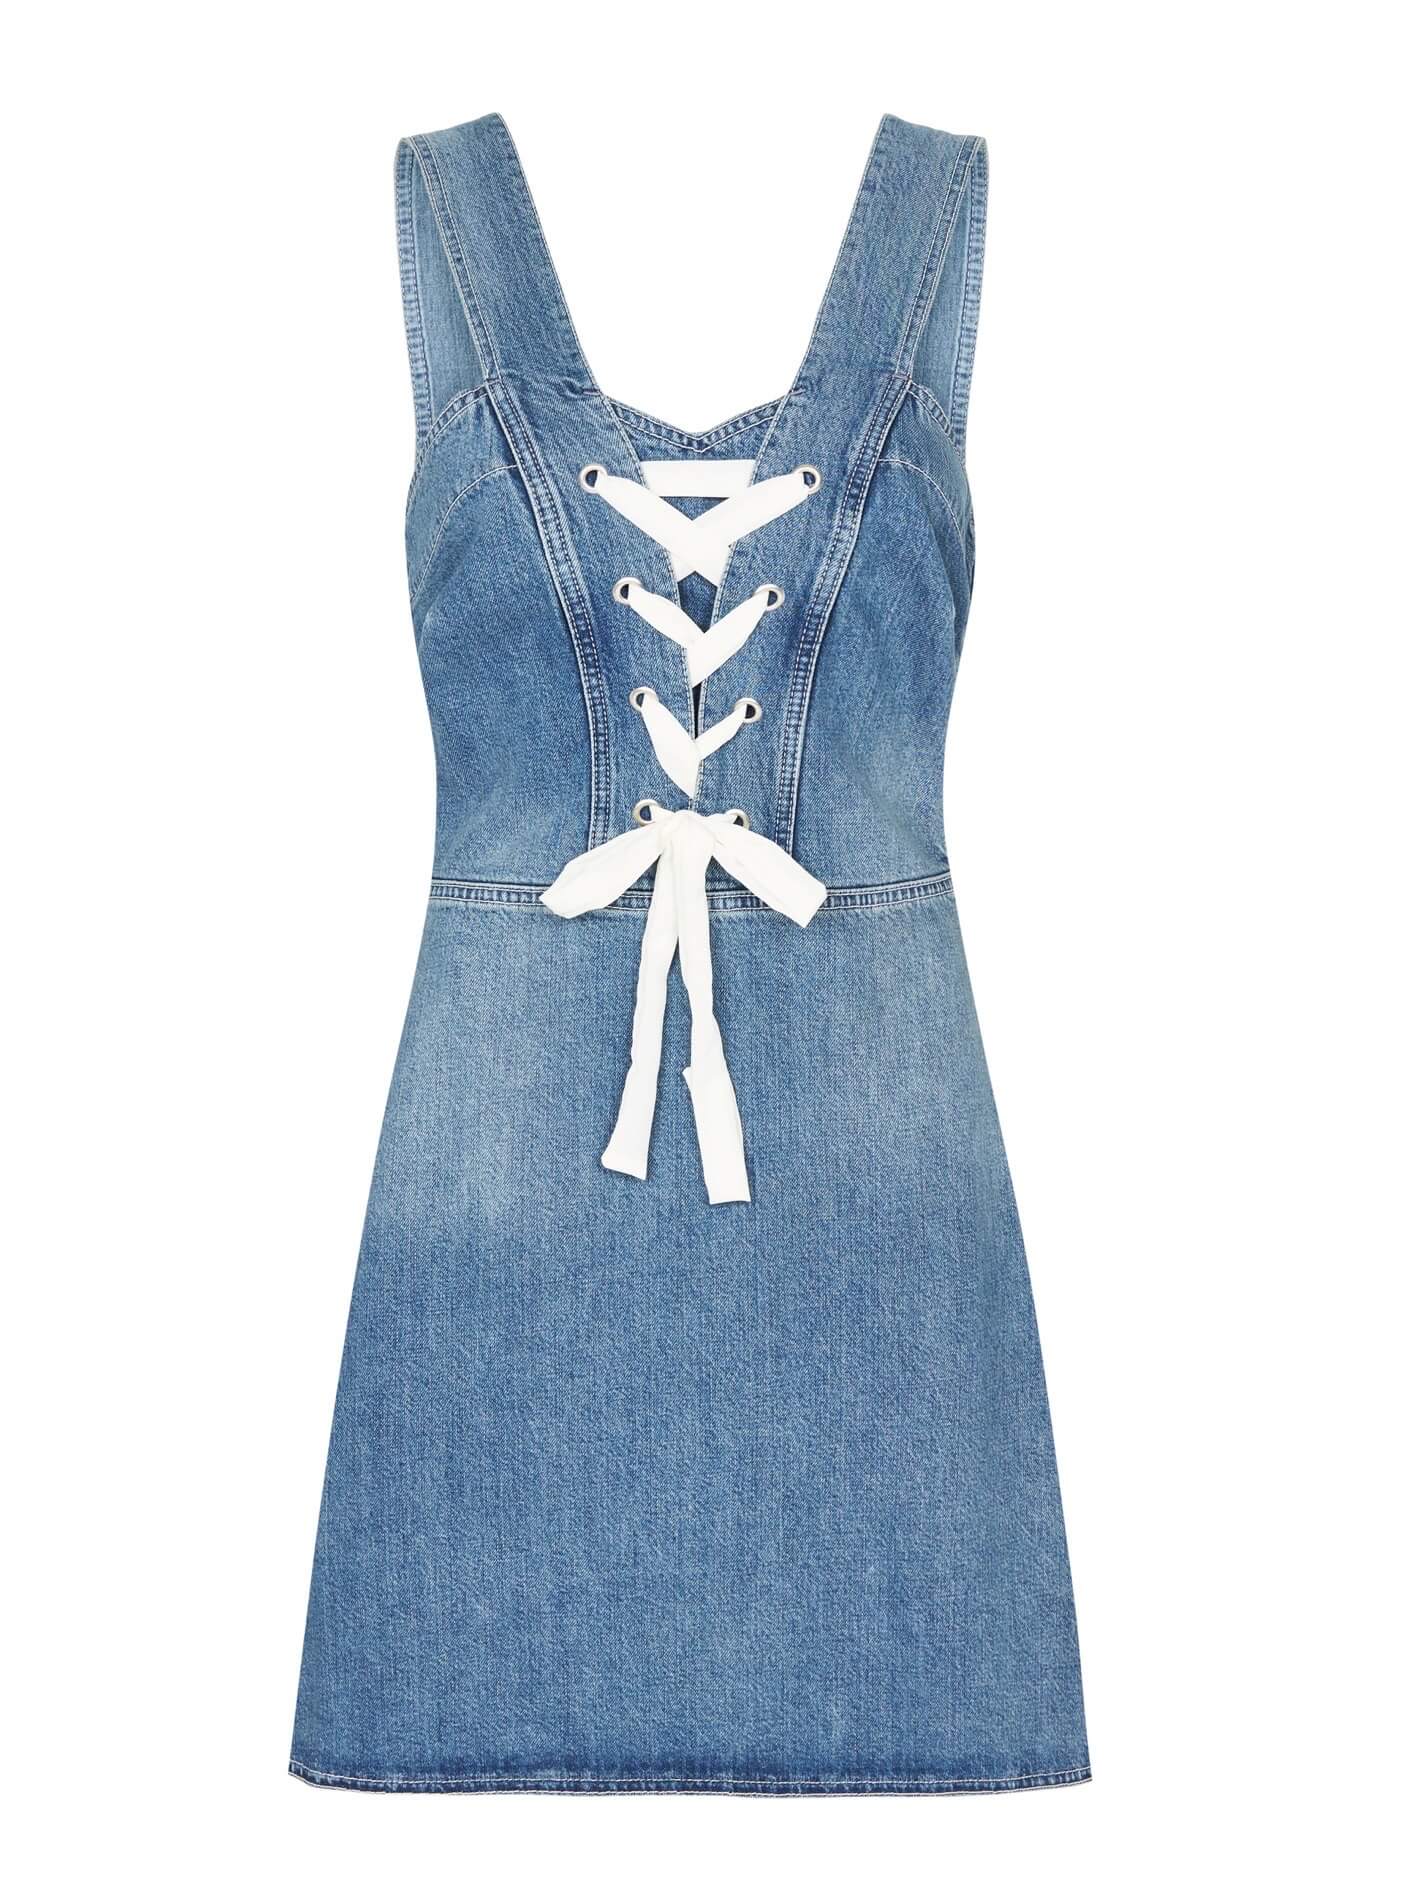 Mayslie Denim Dress - Hailey by PAIGE at ORCHARD MILE